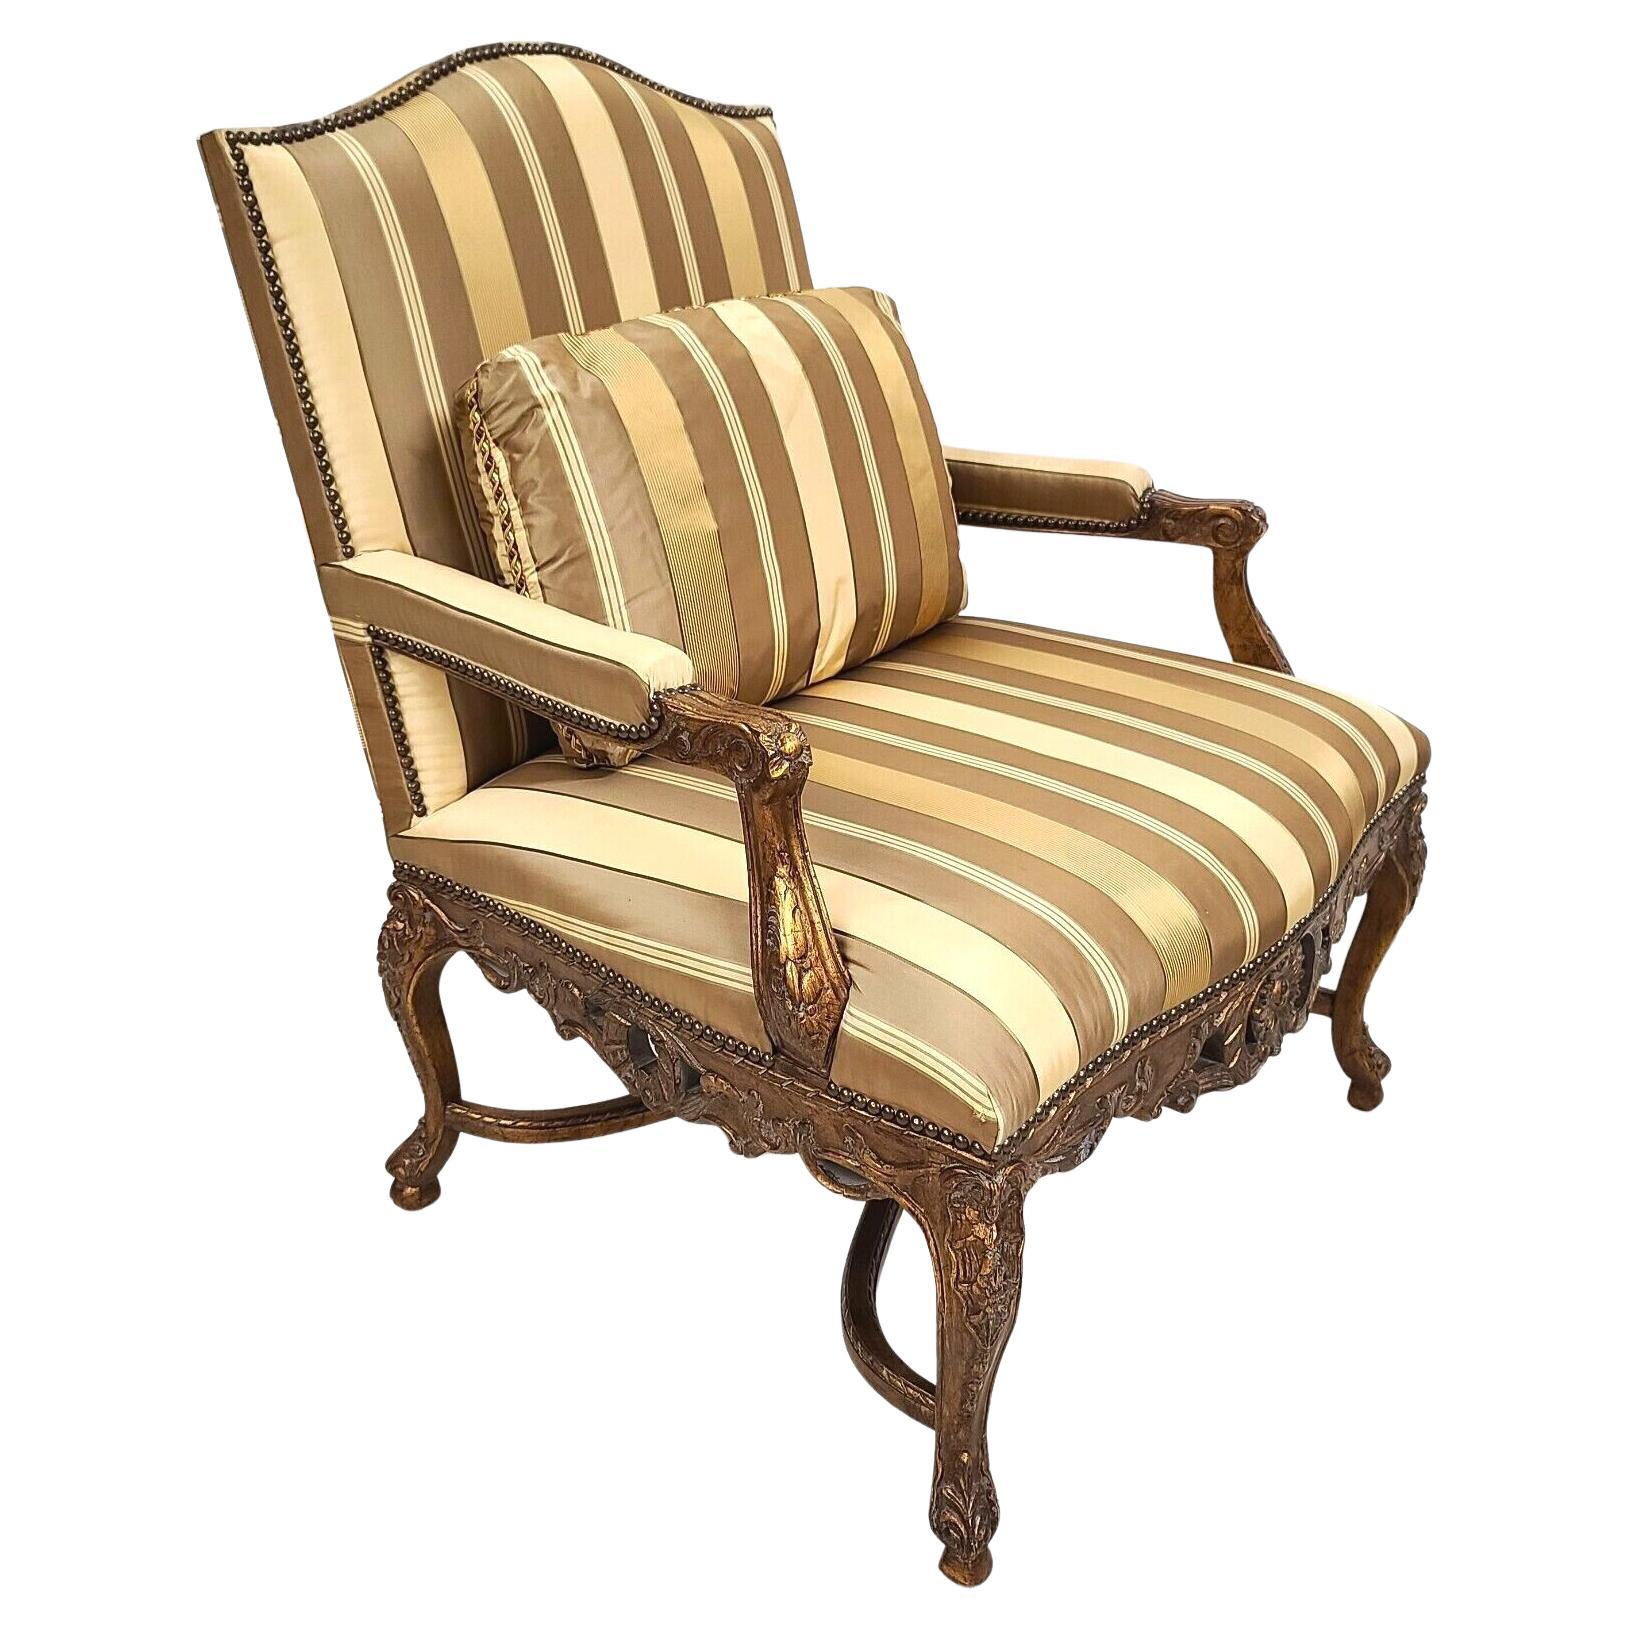 French Provincial Louis XV Giltwood Bergere Armchair by Robb Stucky